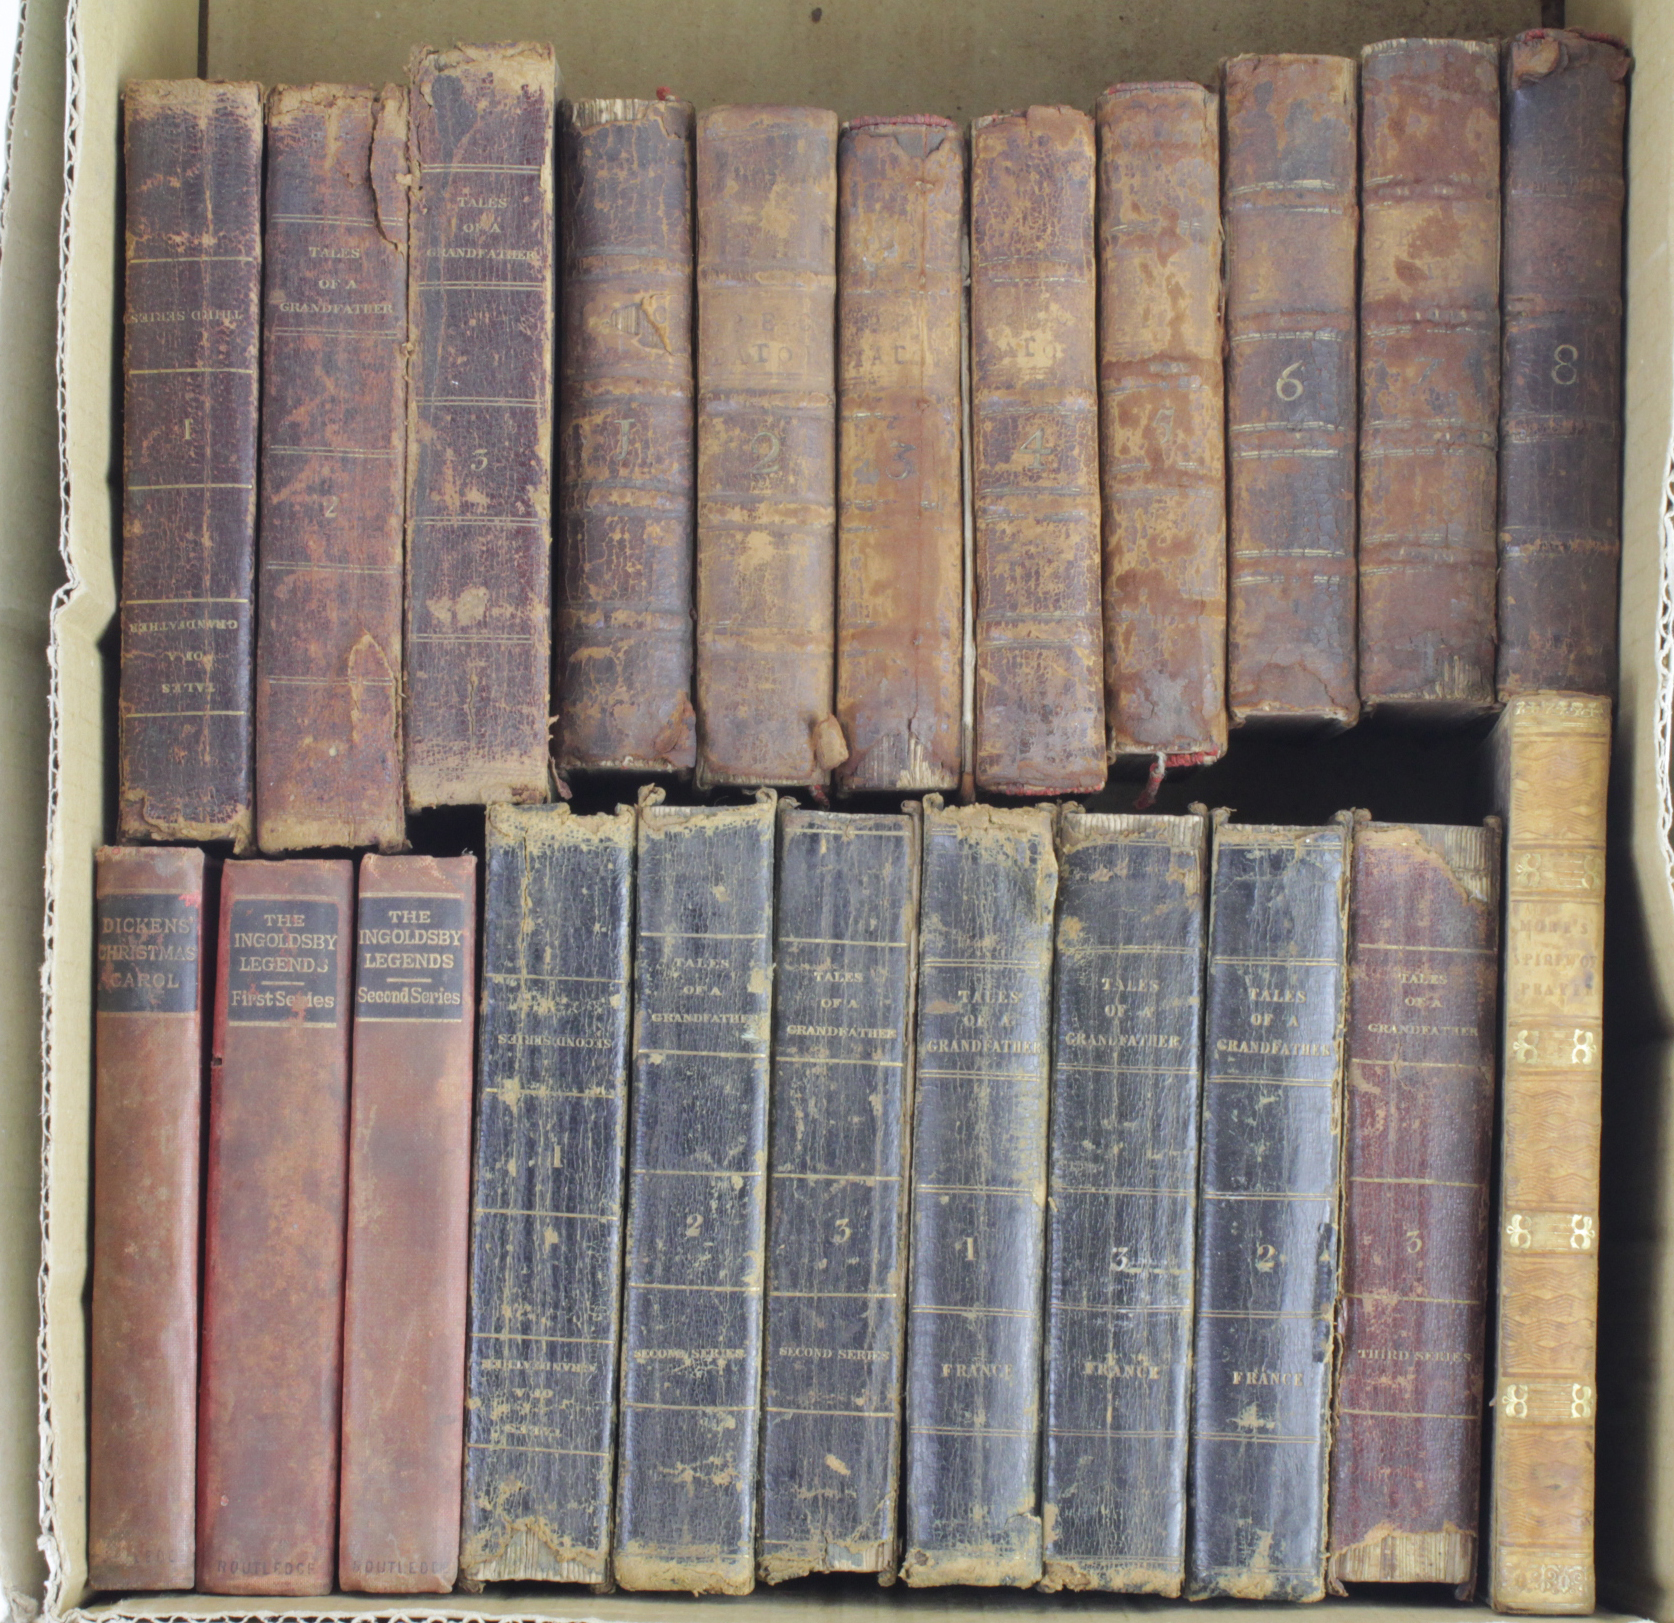 Antiquarian interest. A collection of twenty-two antiquarian books, including 8 volumes of the